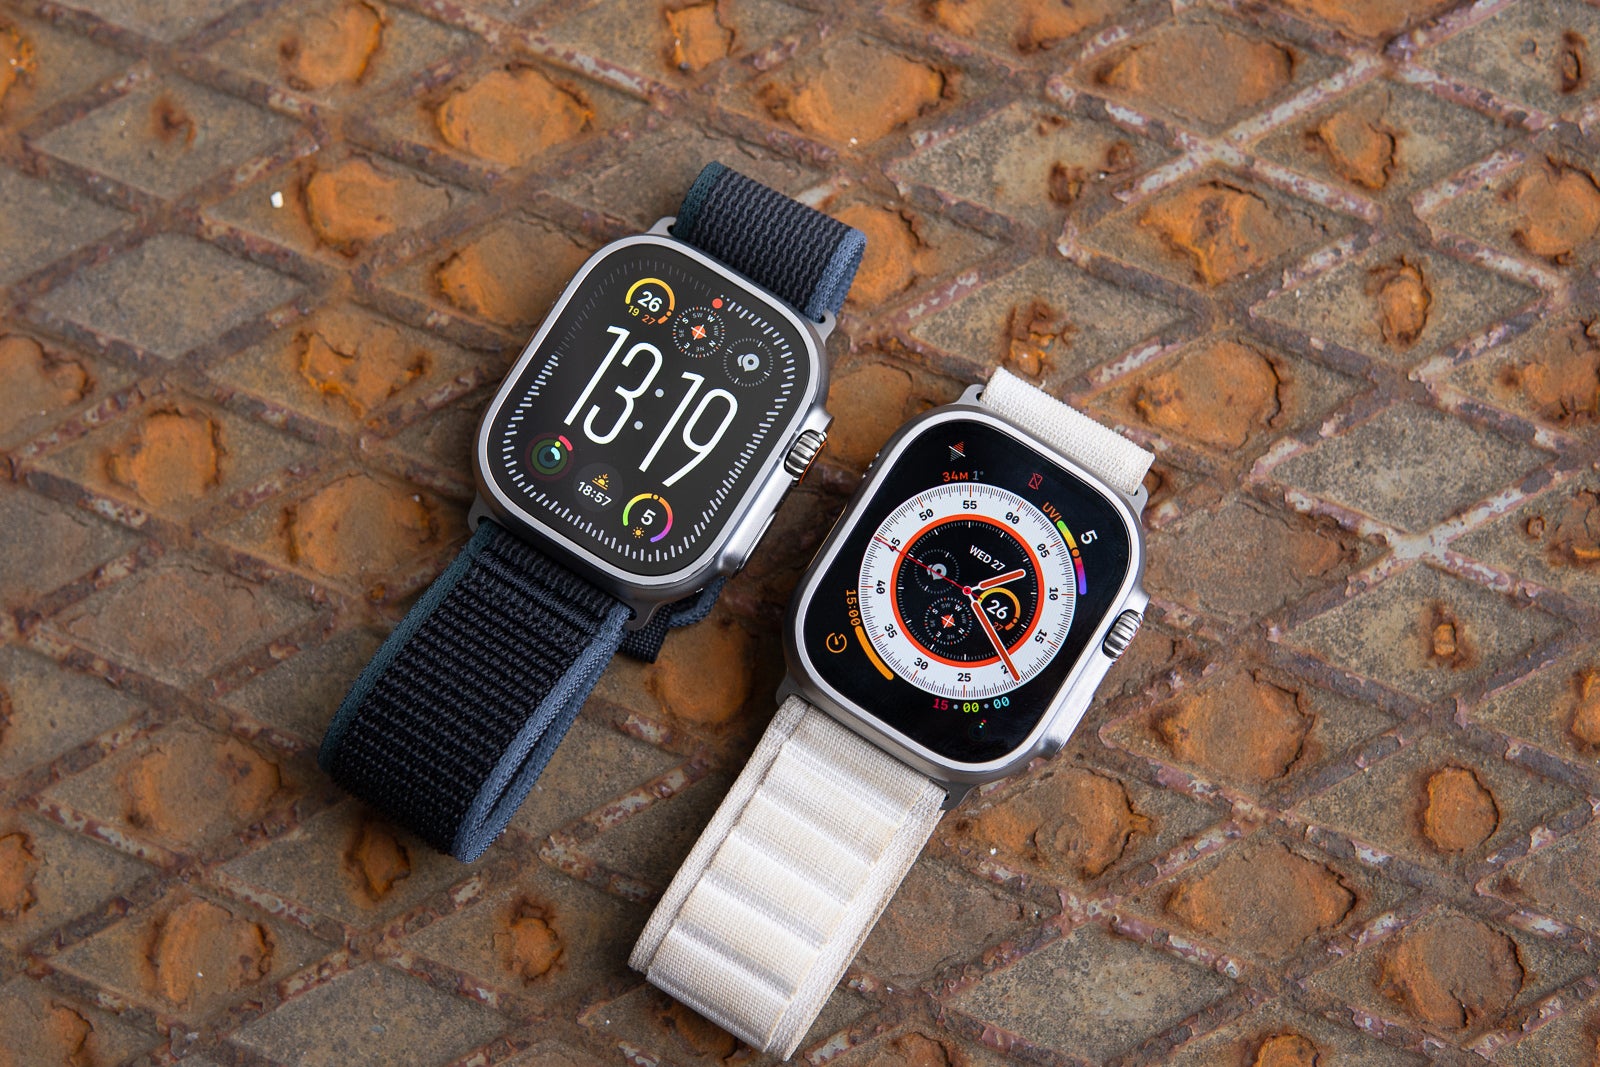 Apple Watch Ultra 2 Review: Cut from the same cloth, but still